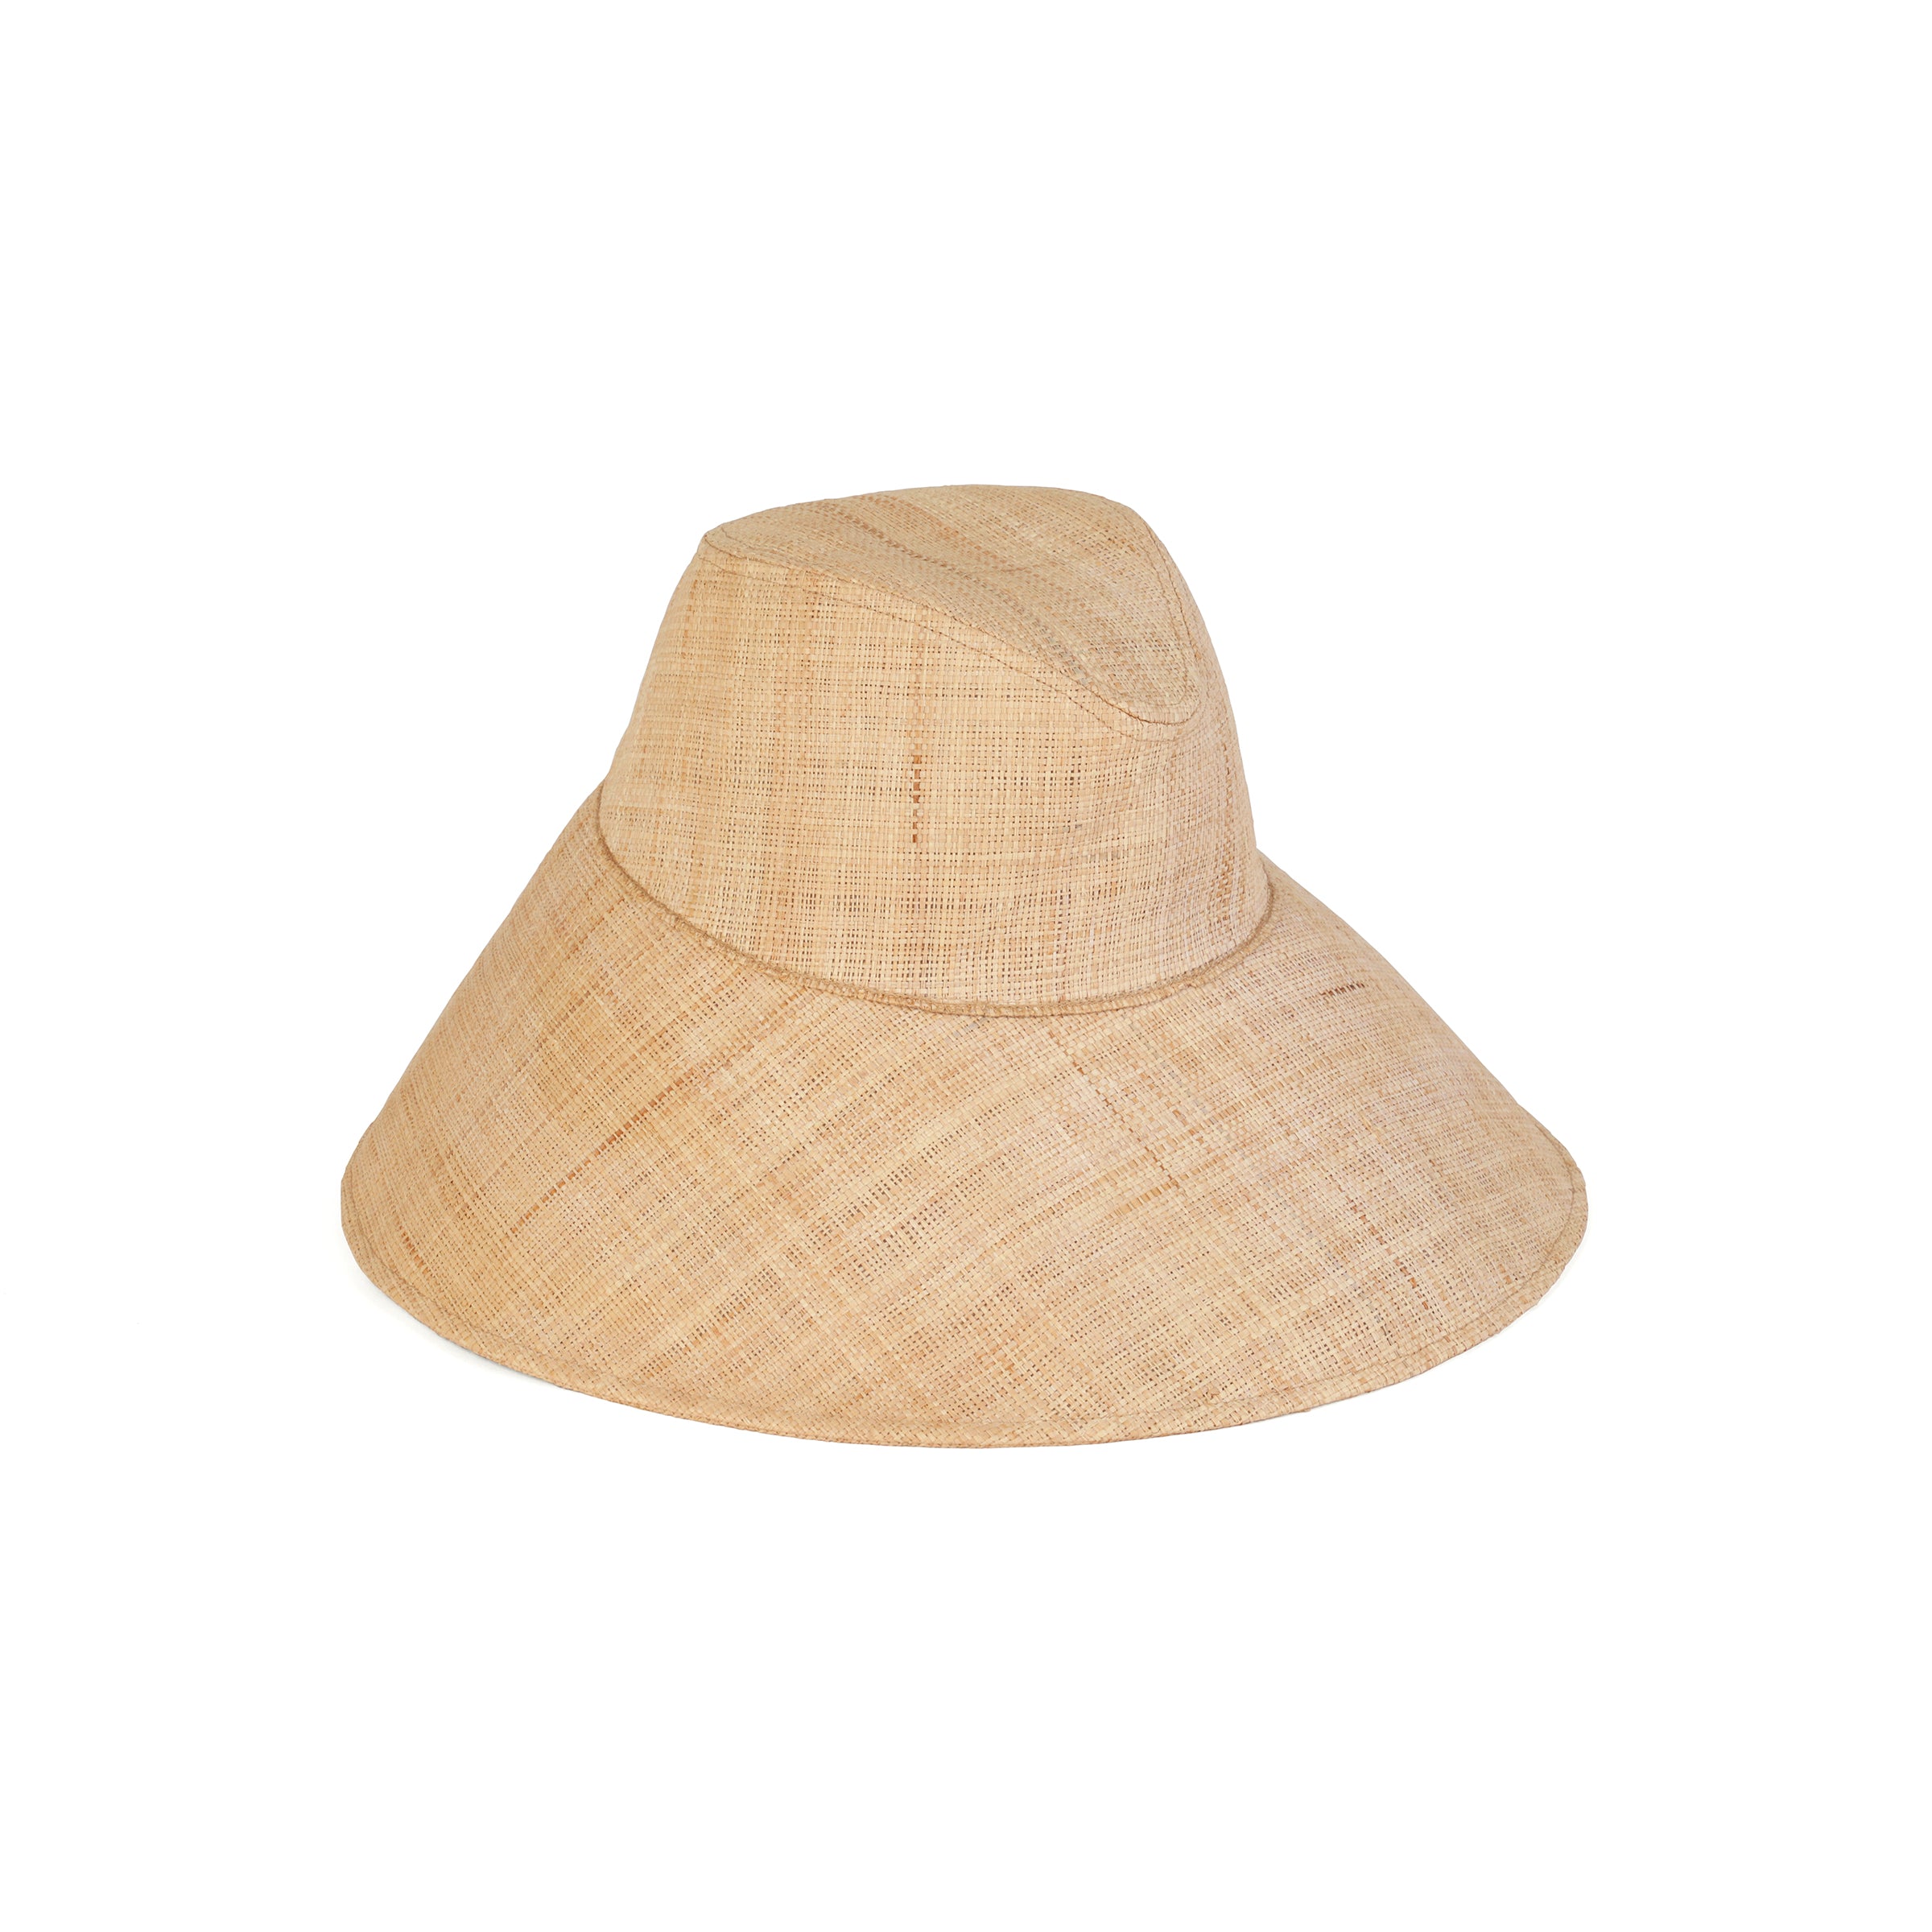 The Cove Lack - US Straw in Hat of Natural Color Bucket